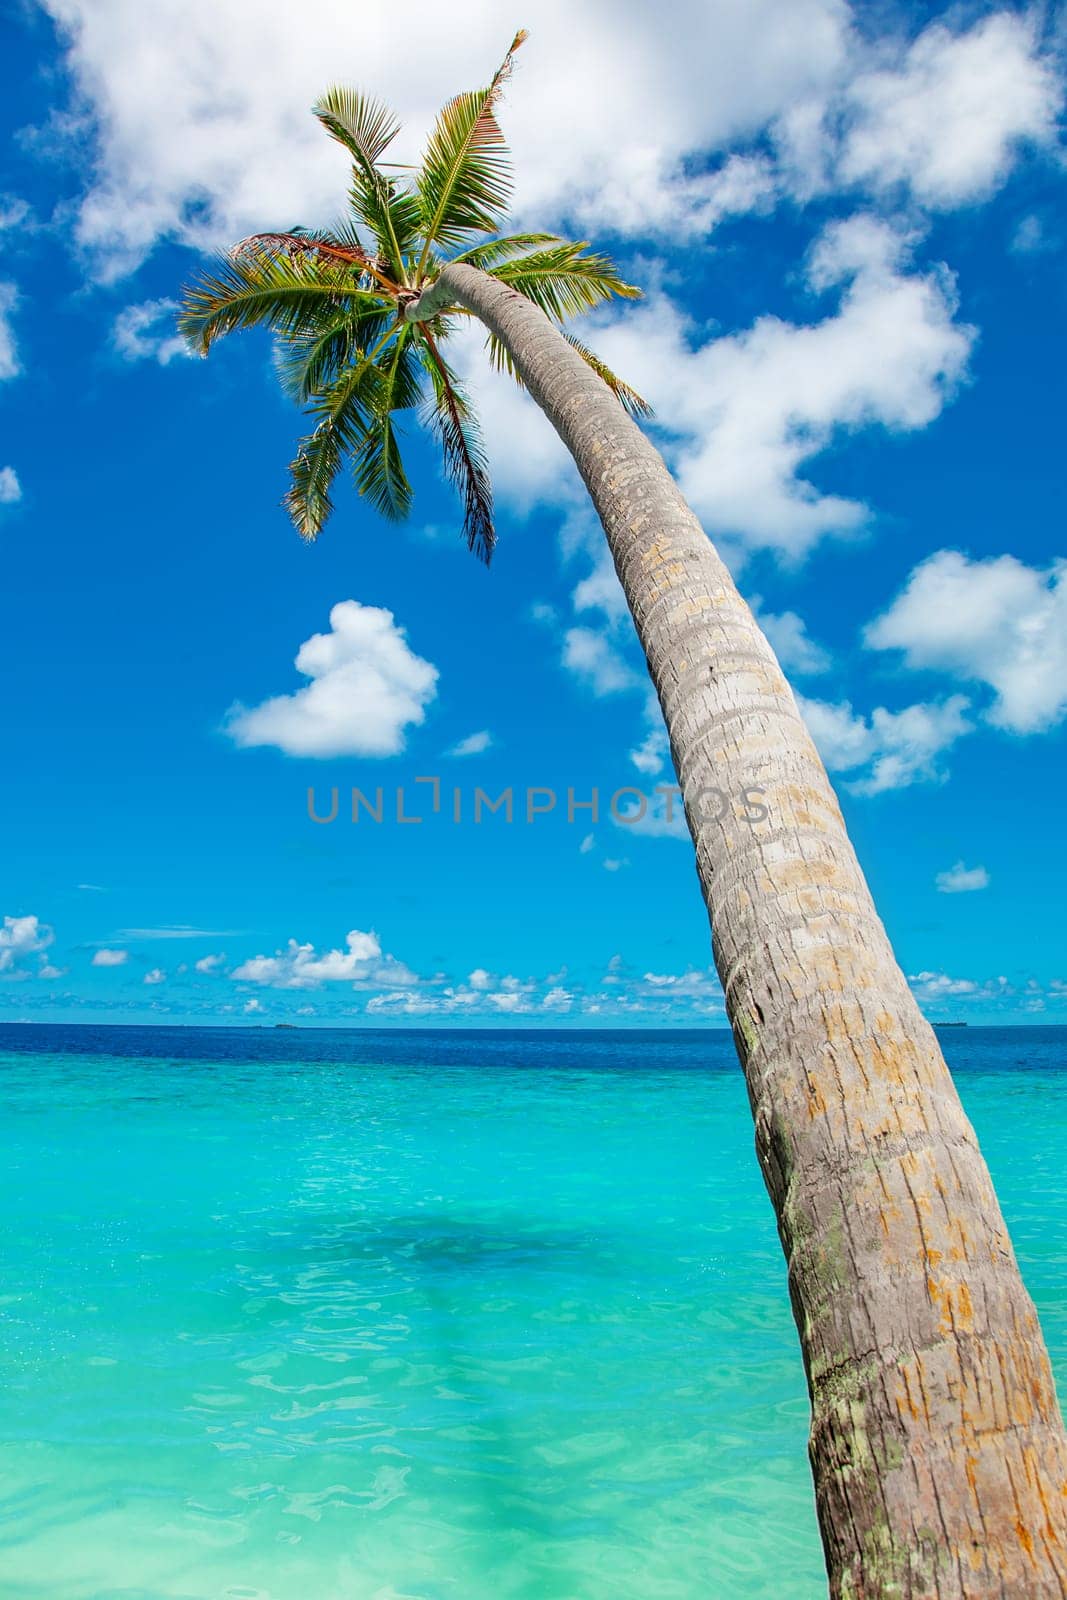 Beautiful palm tree with green foliage hanging under blue ocean water